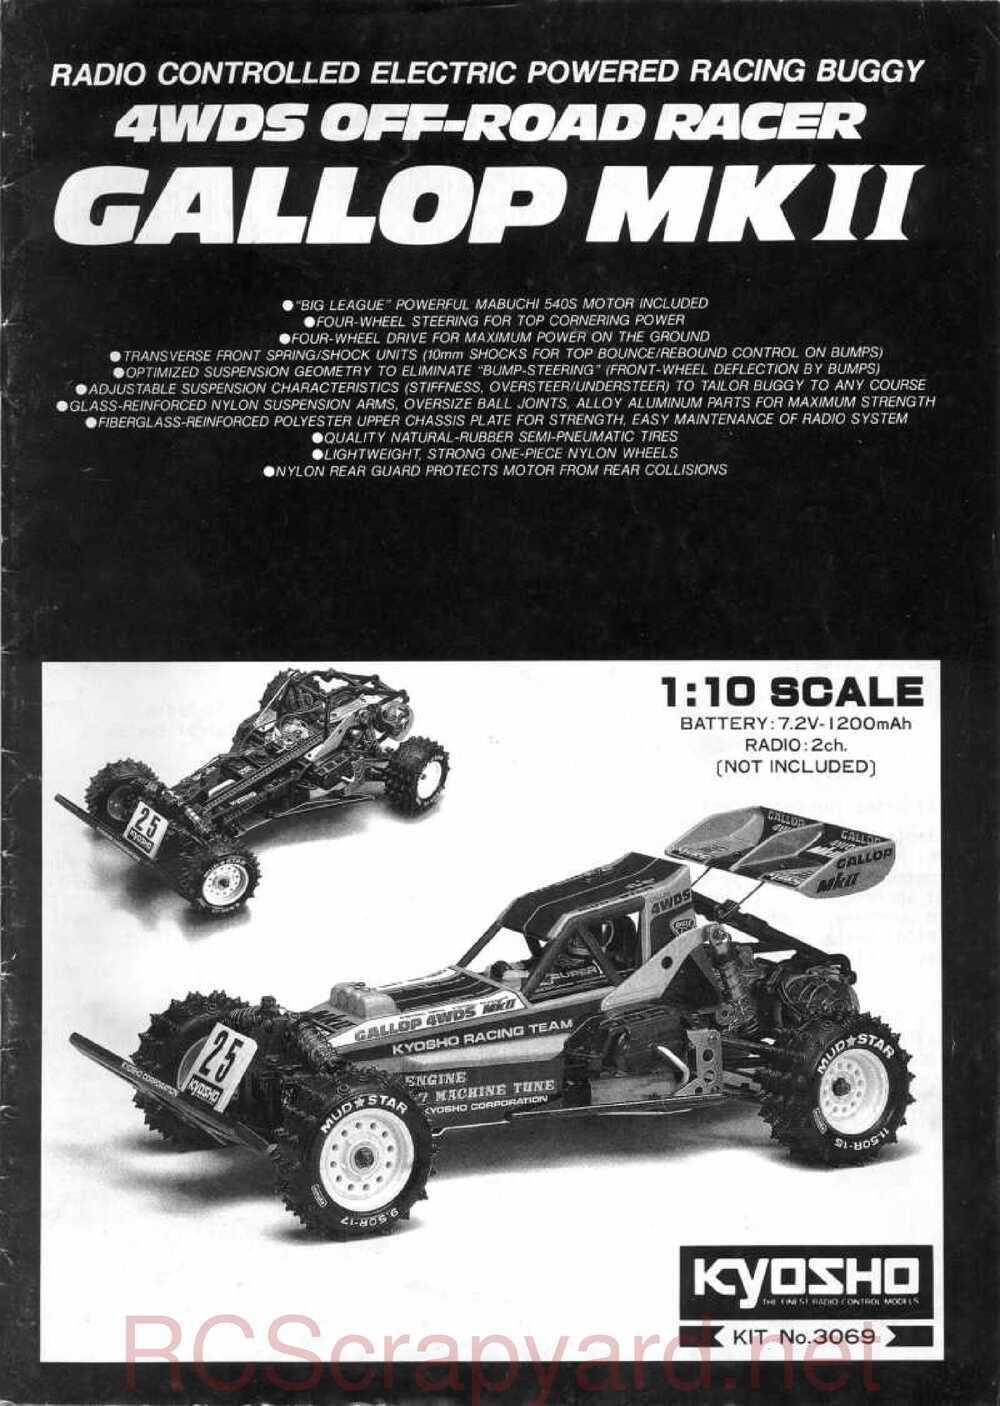 Kyosho - 3069 - Gallop MkII - Manual - Page 01